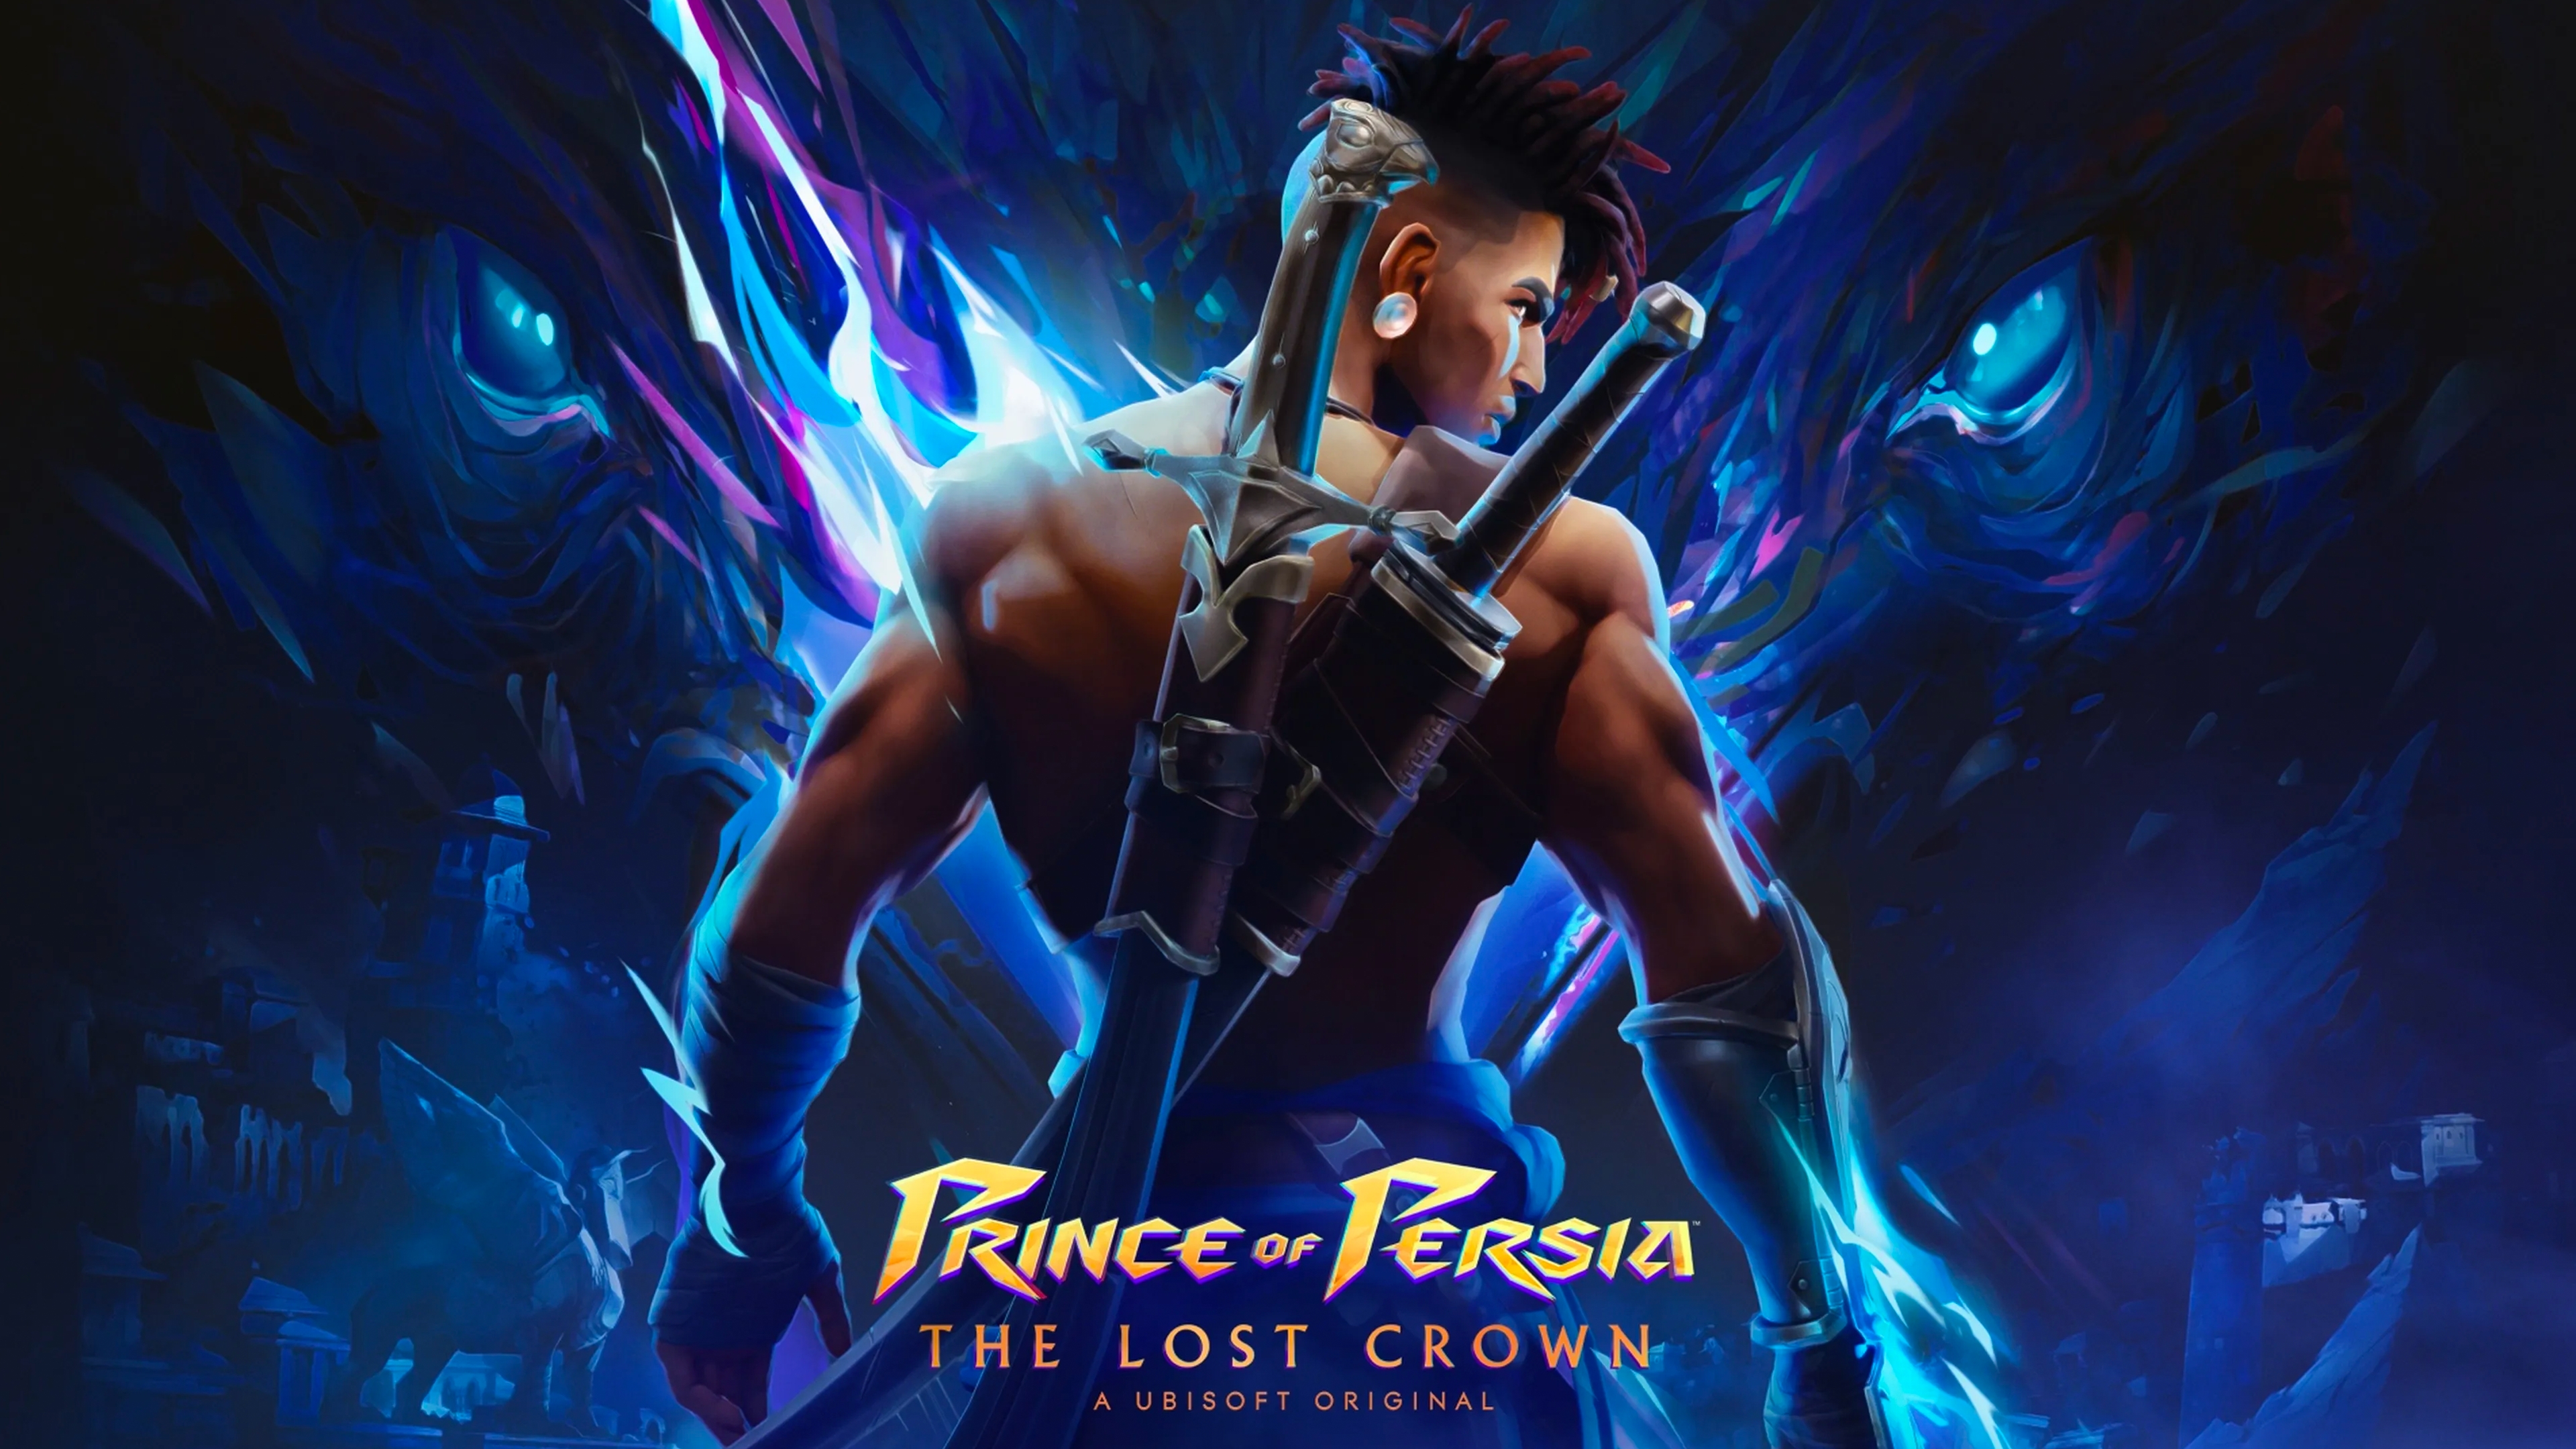 Where To Buy Prince Of Persia: The Lost Crown - GameSpot